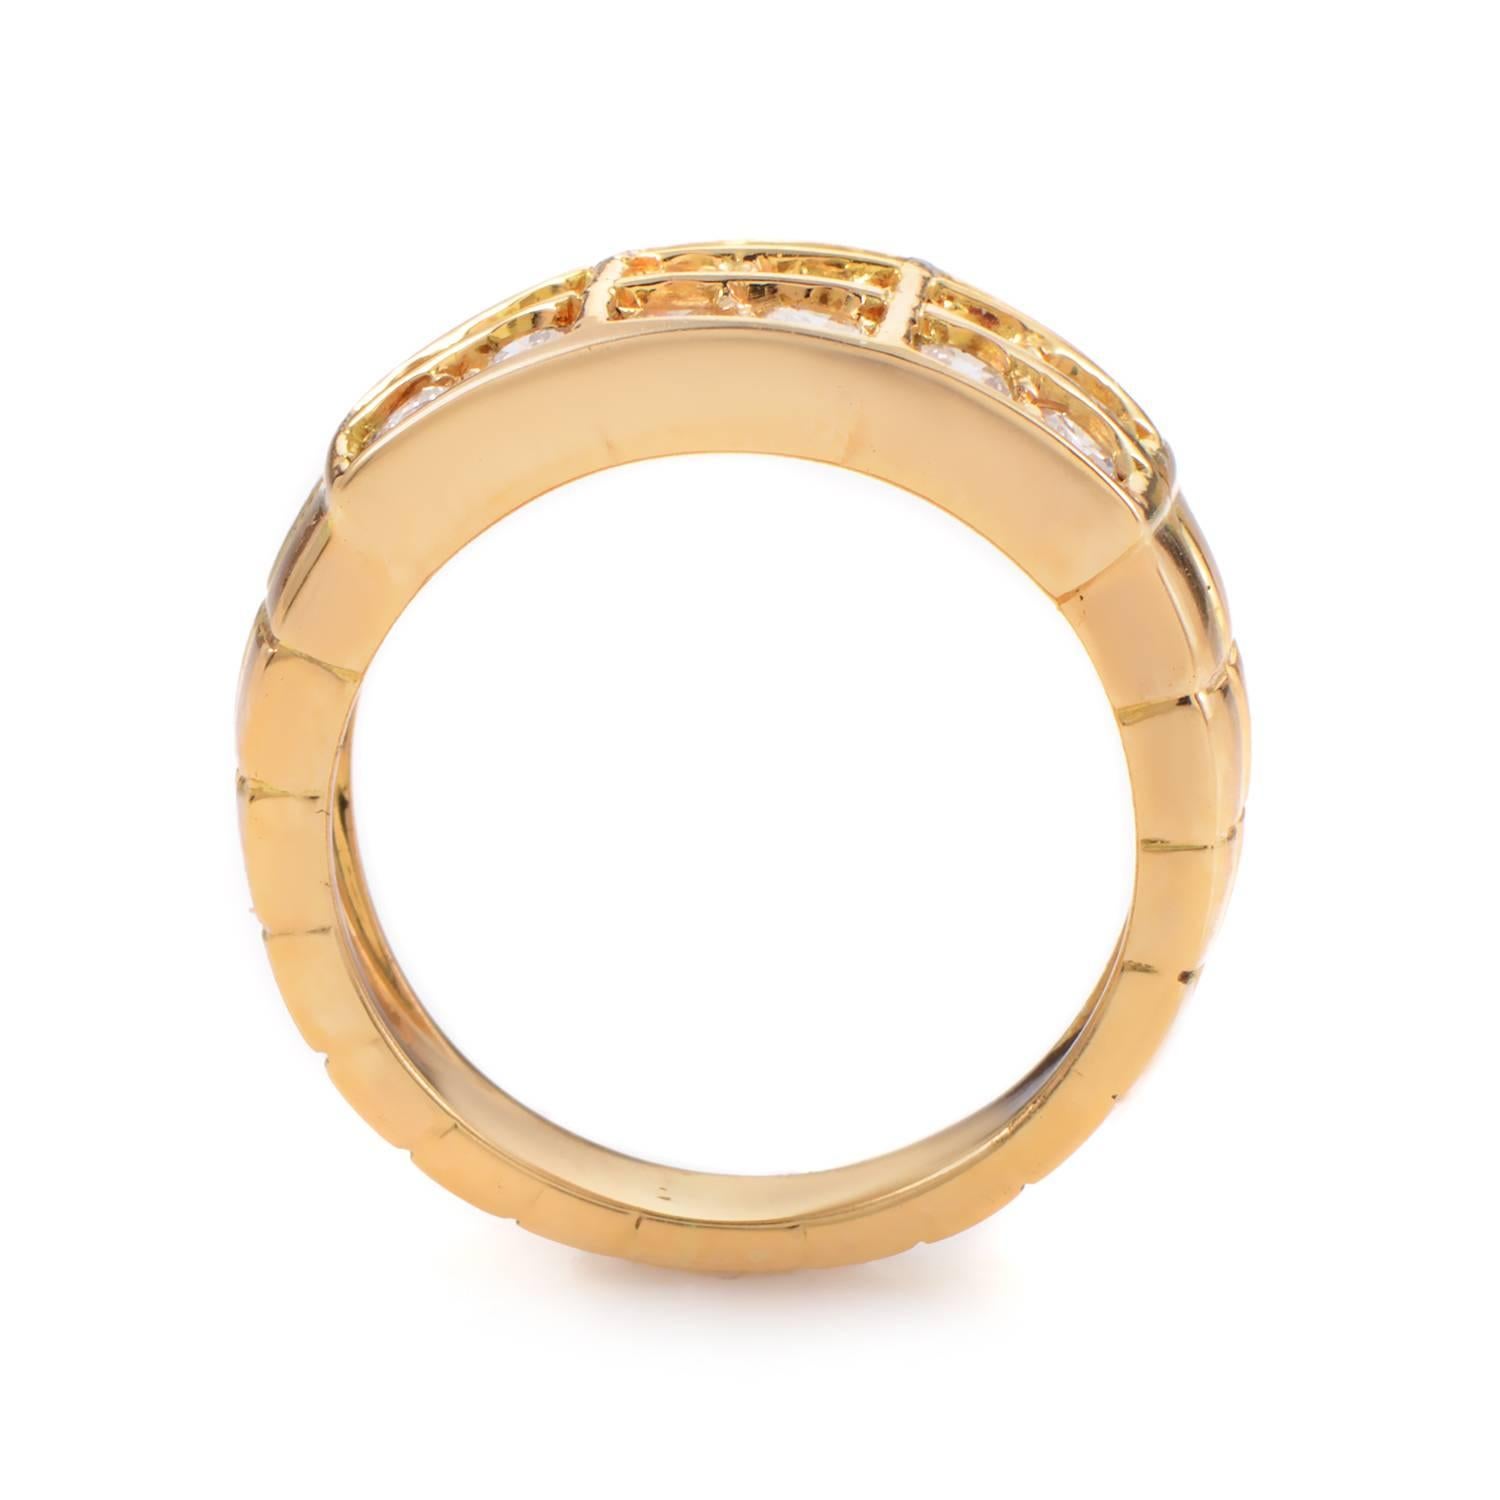 A resplendent ring by the well established house of Mauboussin, this 18K yellow gold tapered shank provides a warm, gleaming base and intriguing setting that gives the impression of bar settings while holding the ~1.10ct of diamonds in bright-cut